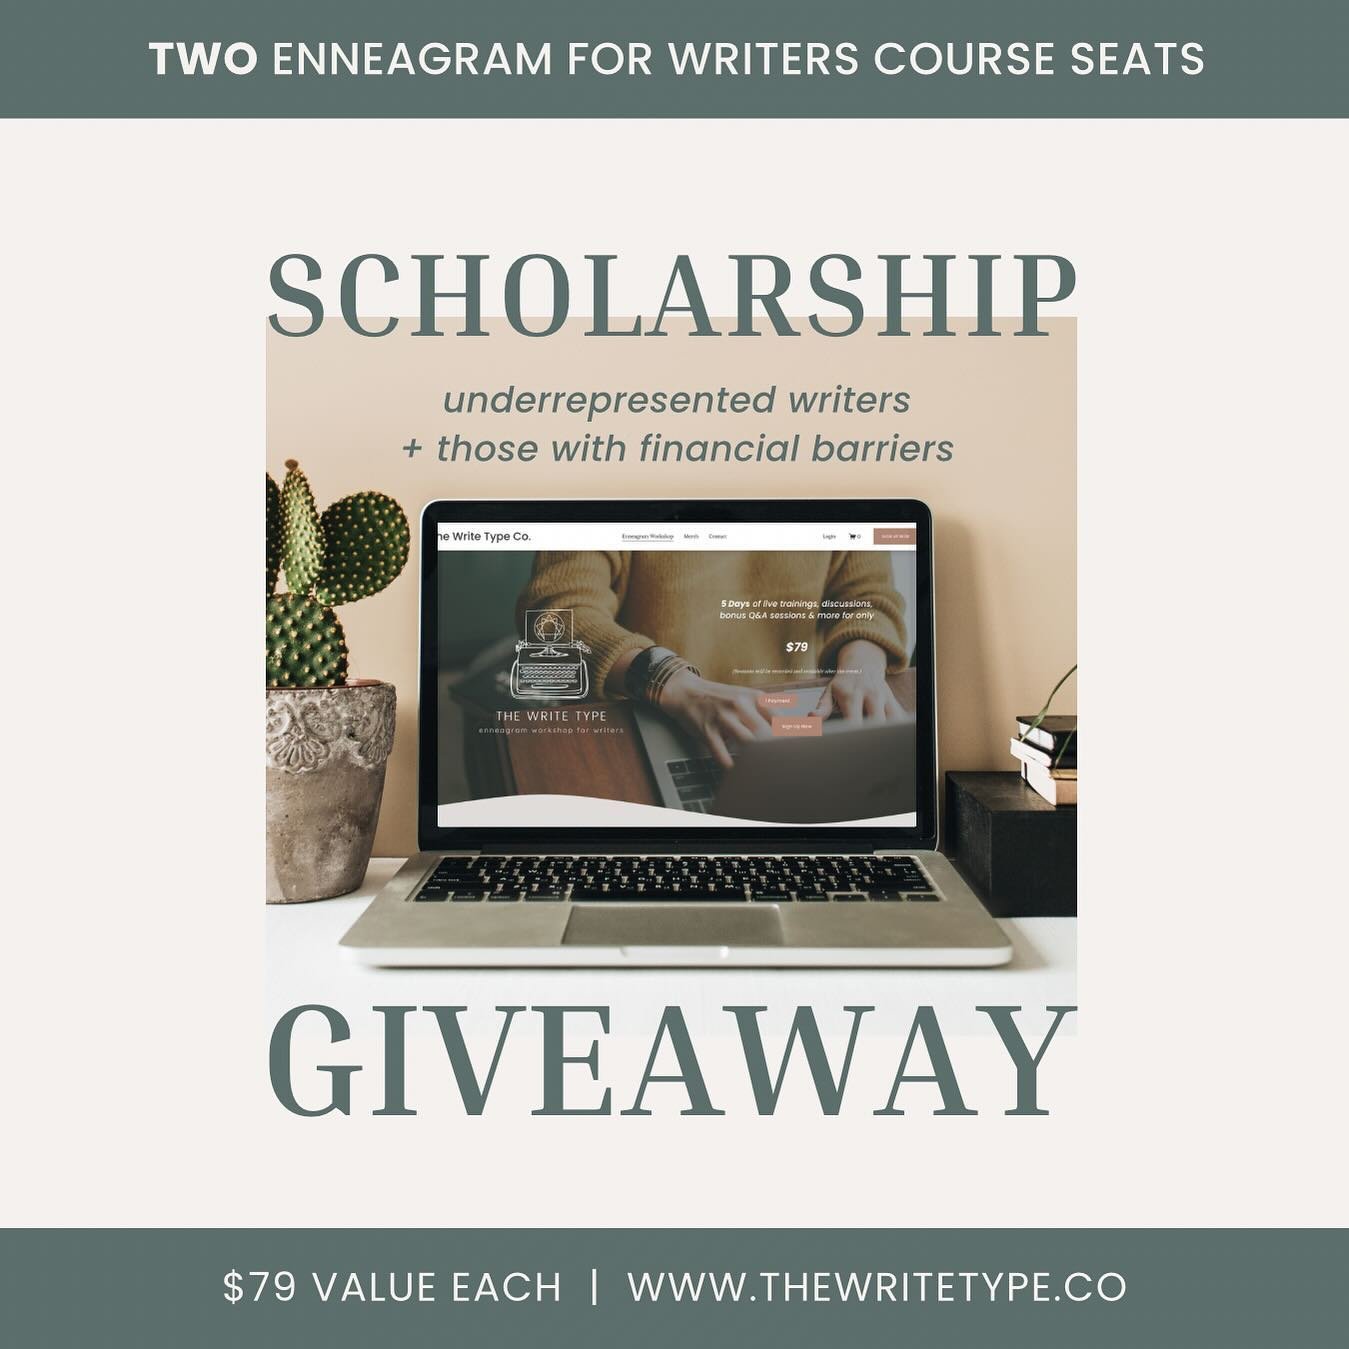 🌟 Win one of TWO Scholarship Seats for the Enneagram for Writers Workshop! 🌟

📝 Are you or someone you know a writer from a traditionally underrepresented background? I&rsquo;m so excited to be able to give away TWO special scholarship seats for o